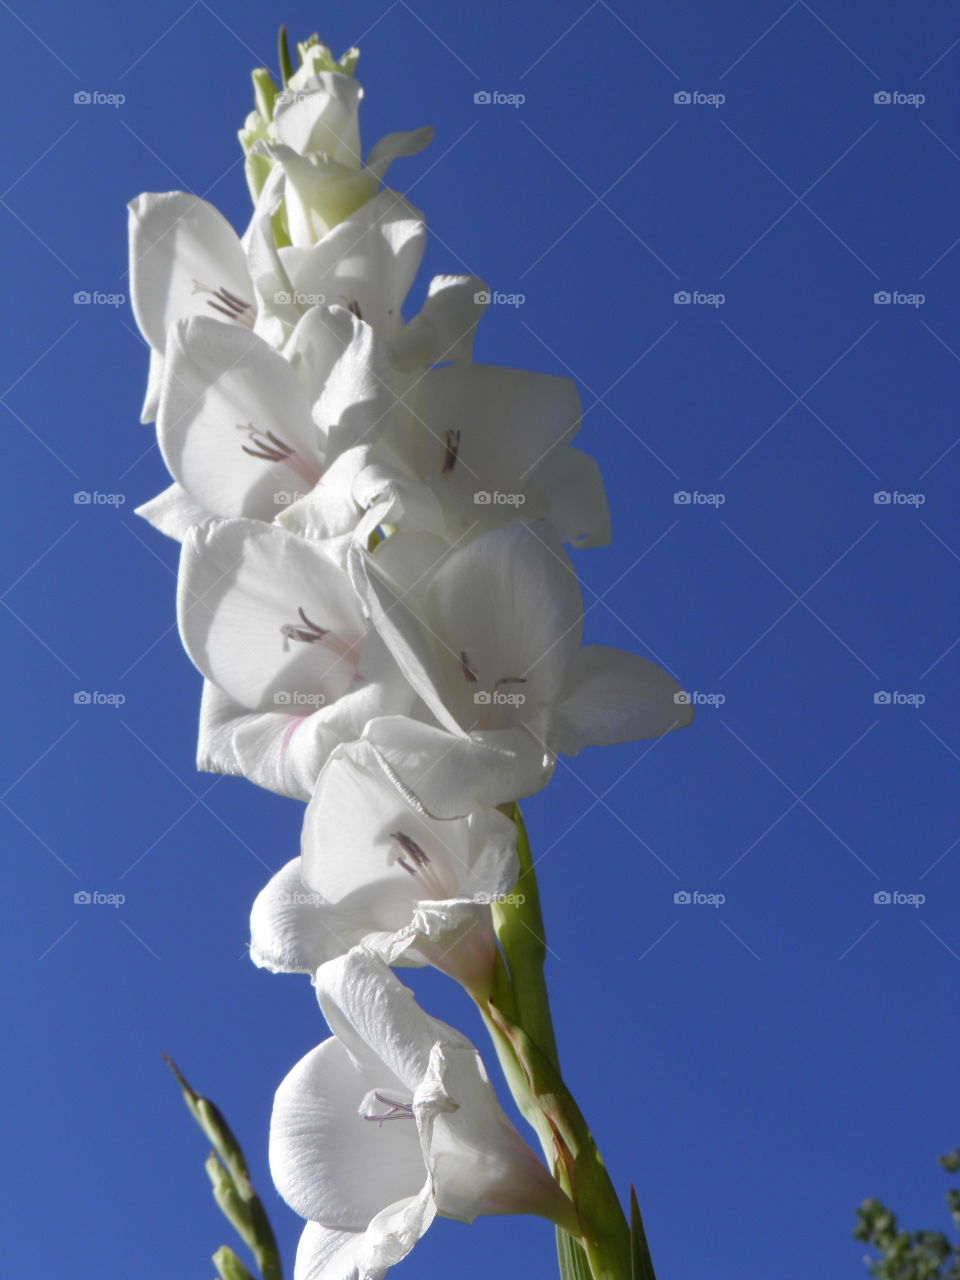 Brightly colored flower with blue sky background.